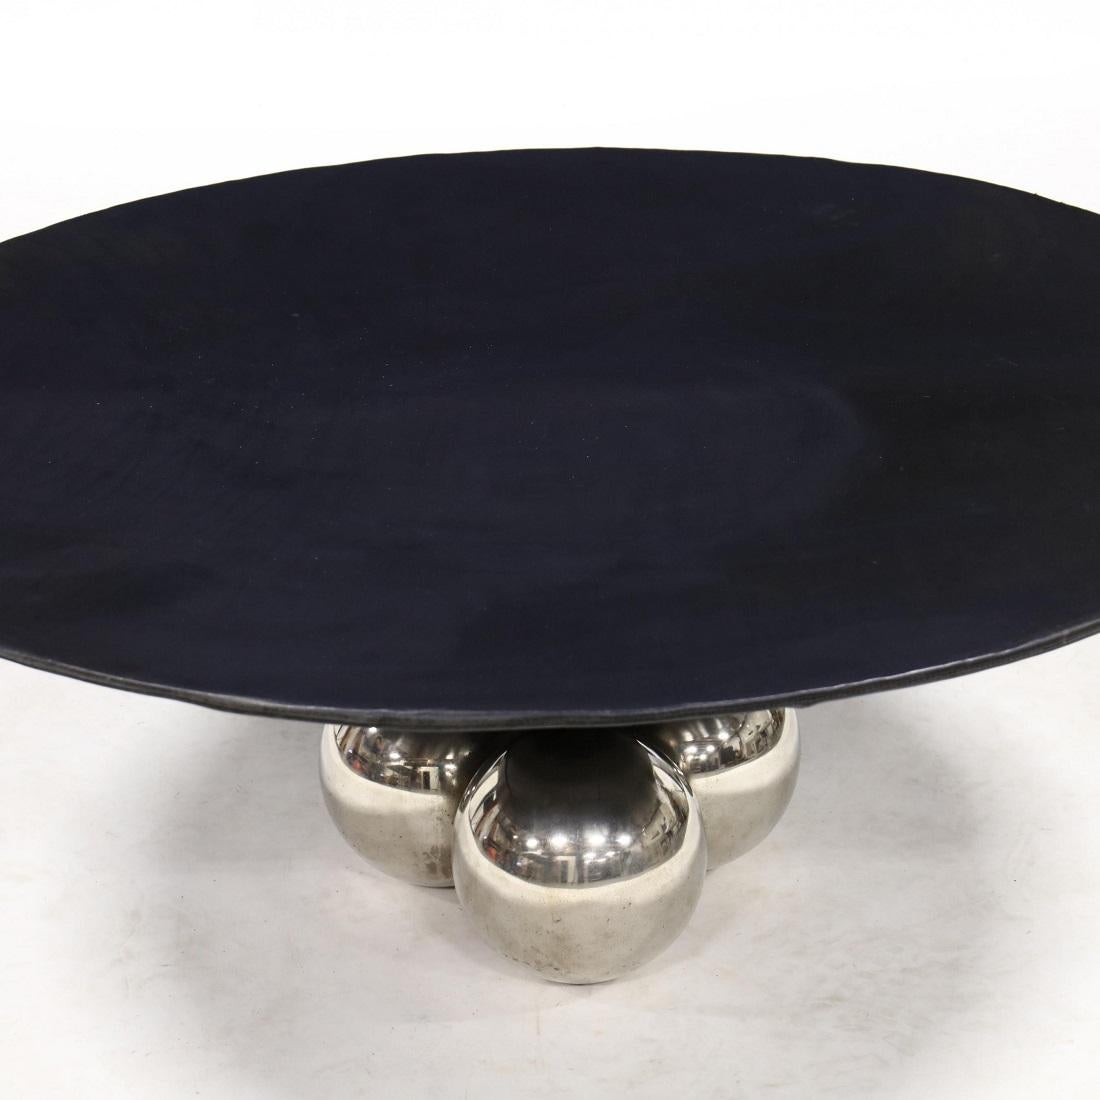 Leather and chrome coffee table by Stanley Jay Friedman for Brueton. The table is dark blue leather and the base has three round weighted chrome balls.